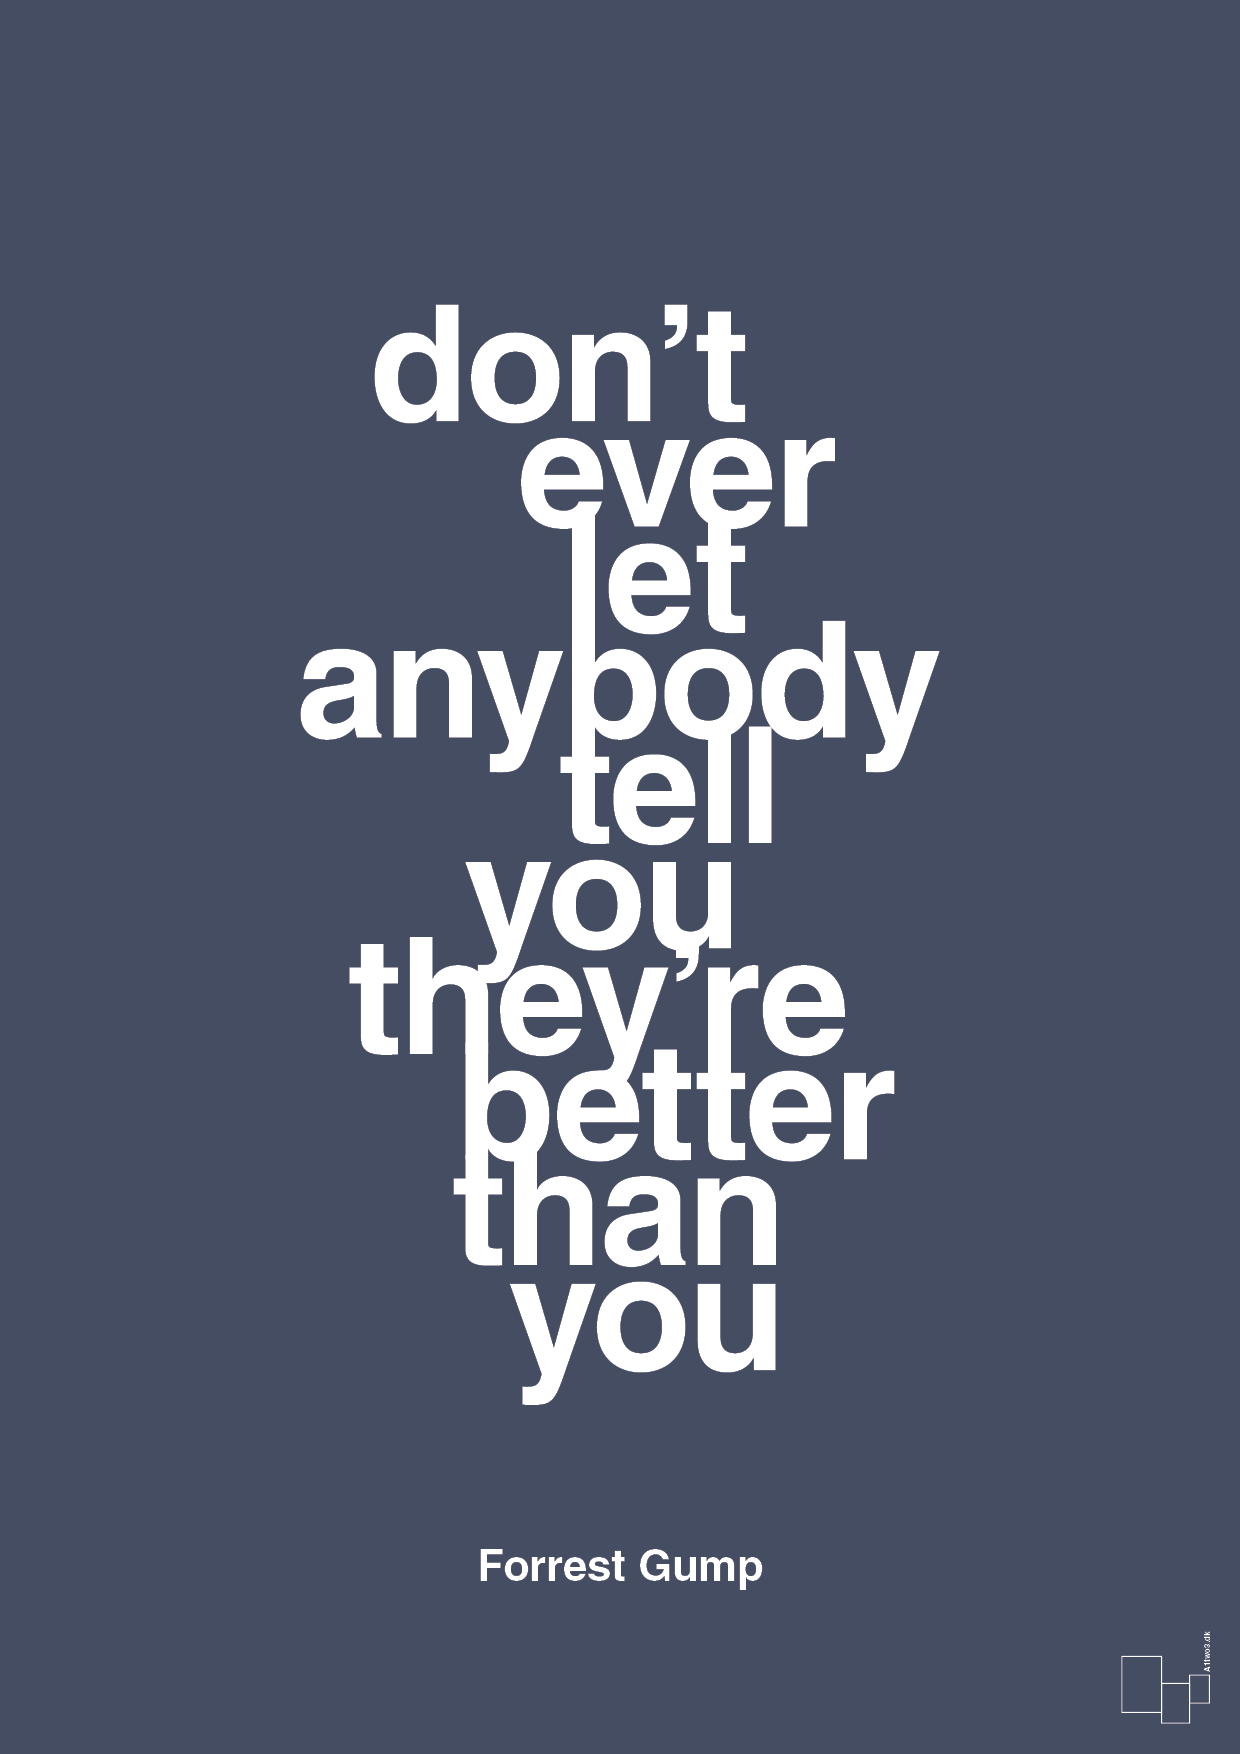 don’t ever let anybody tell you they’re better than you - Plakat med Citater i Petrol